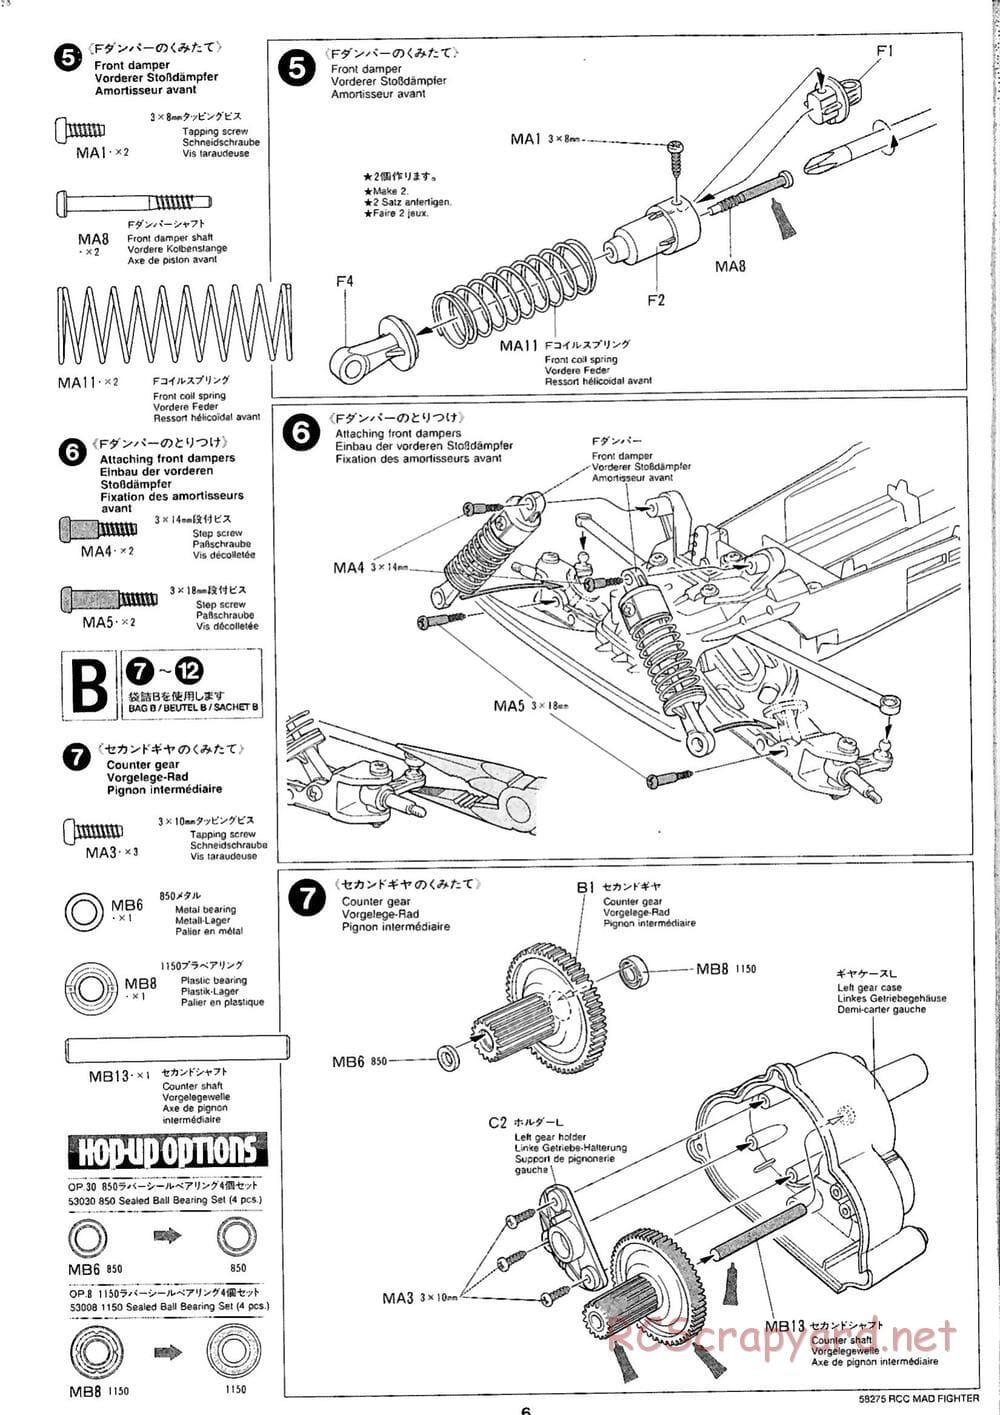 Tamiya - Mad Fighter Chassis - Manual - Page 6